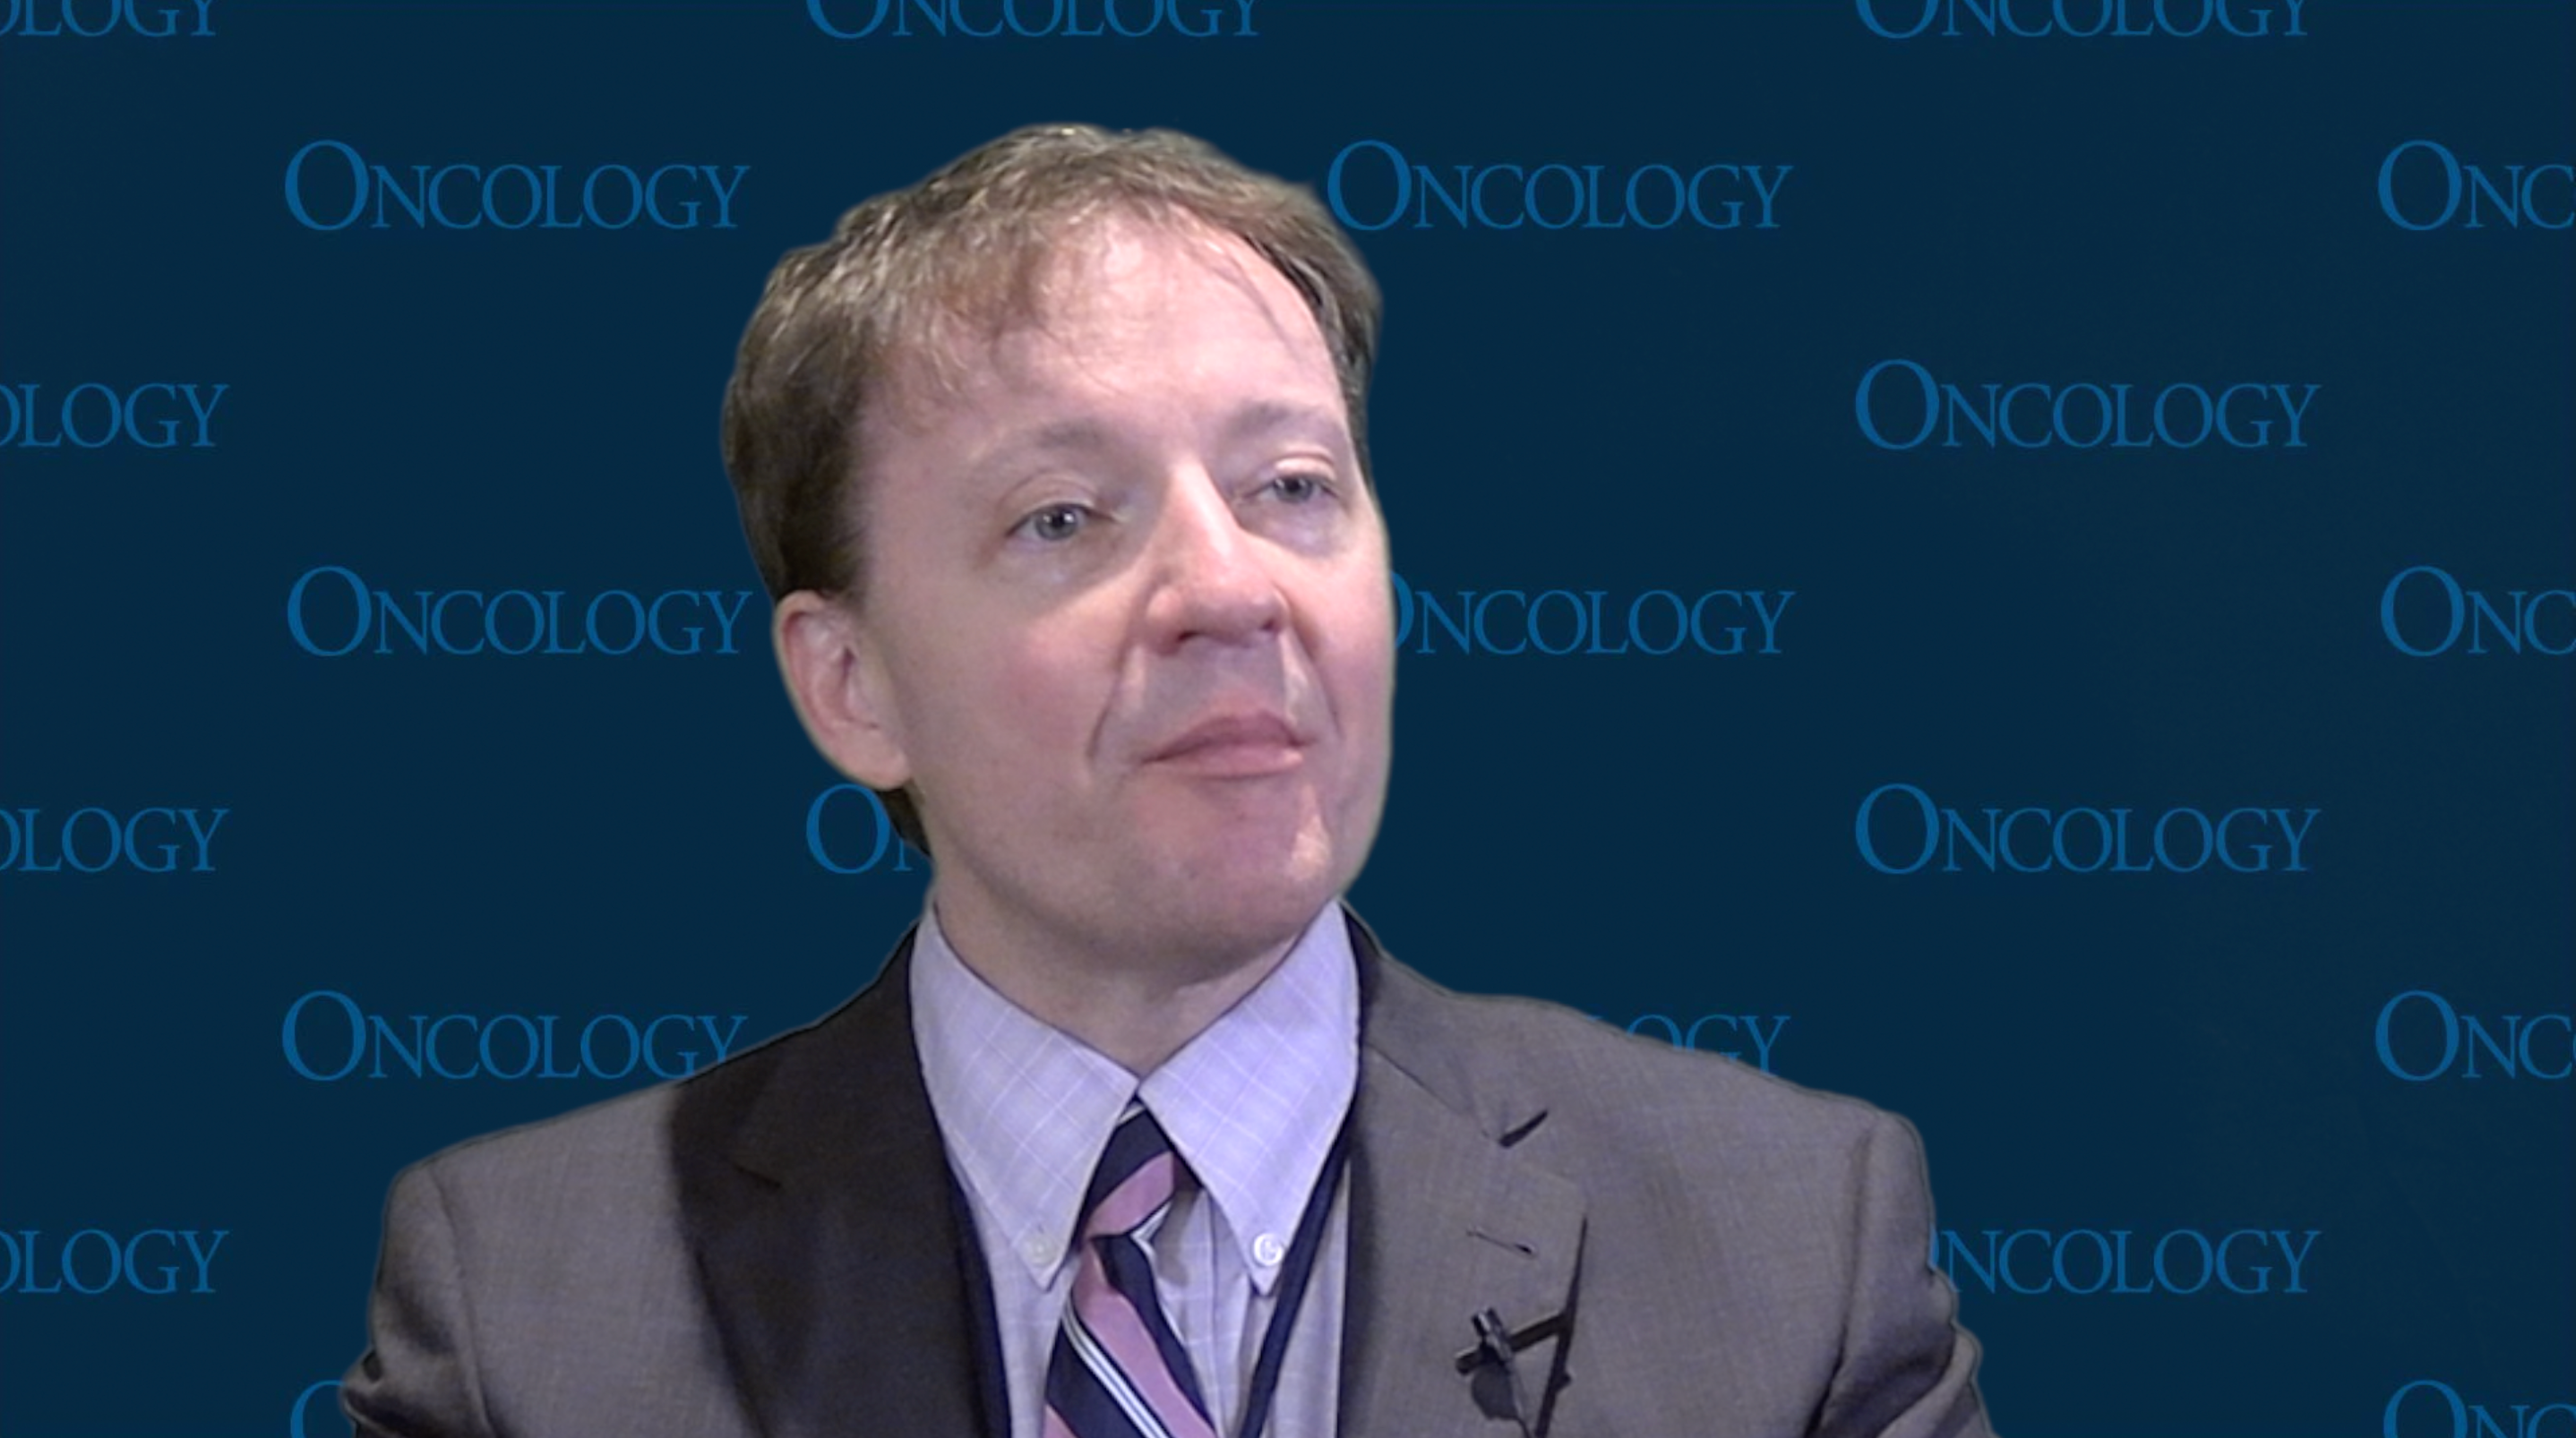 Steven J. Chmura, MD, PhD, Discusses Relevance of Additional Metastases-Directed Treatment in Oligometastatic Breast Cancer